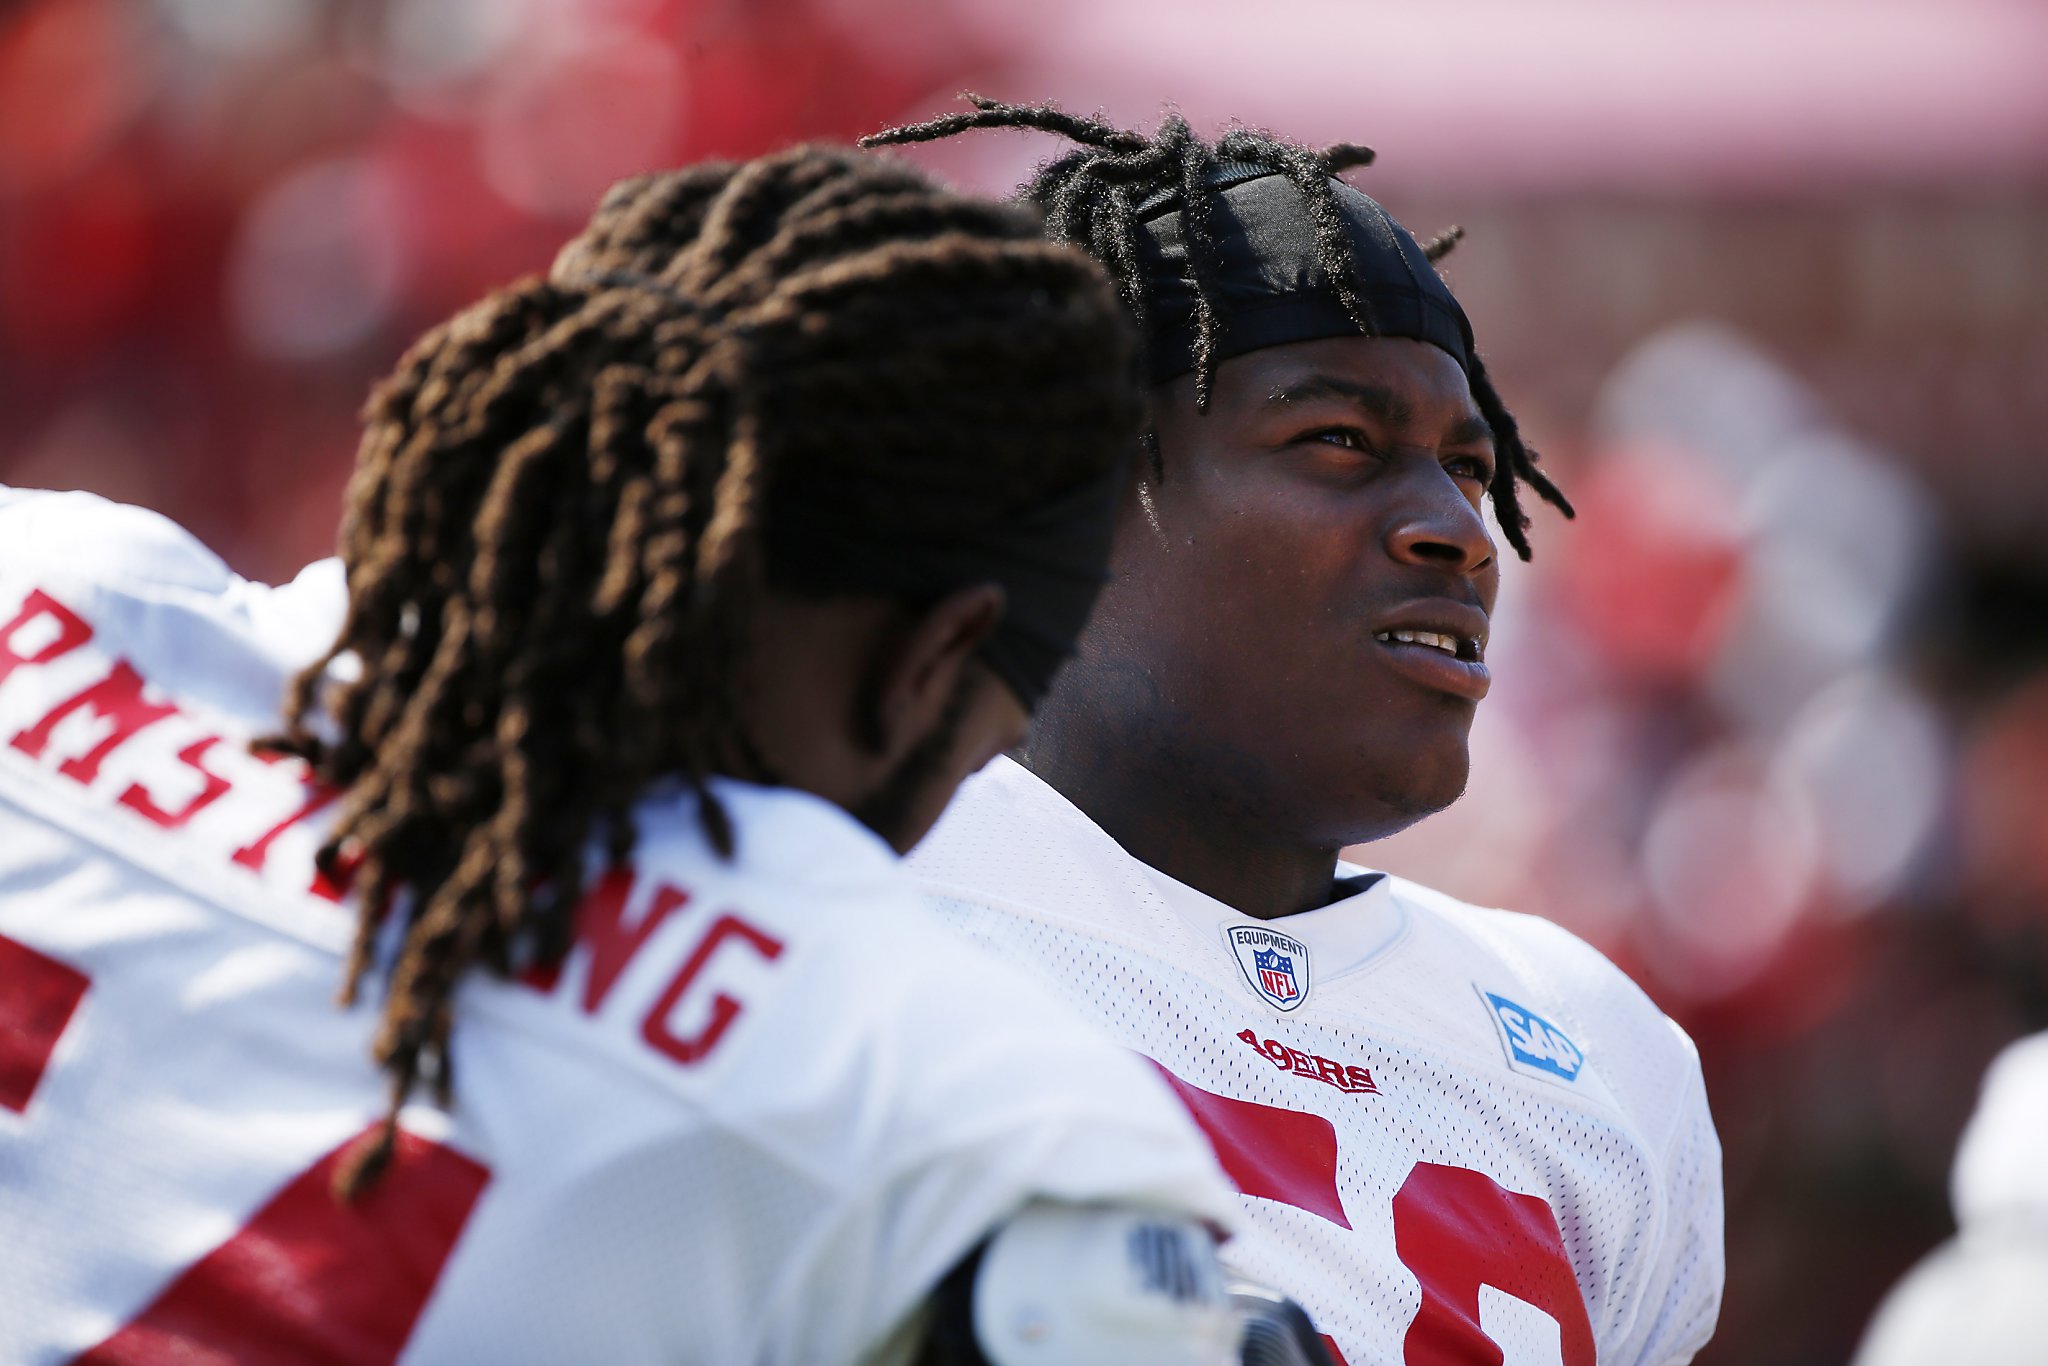 Reuben Foster domestic violence charges a test case for 49ers leadership